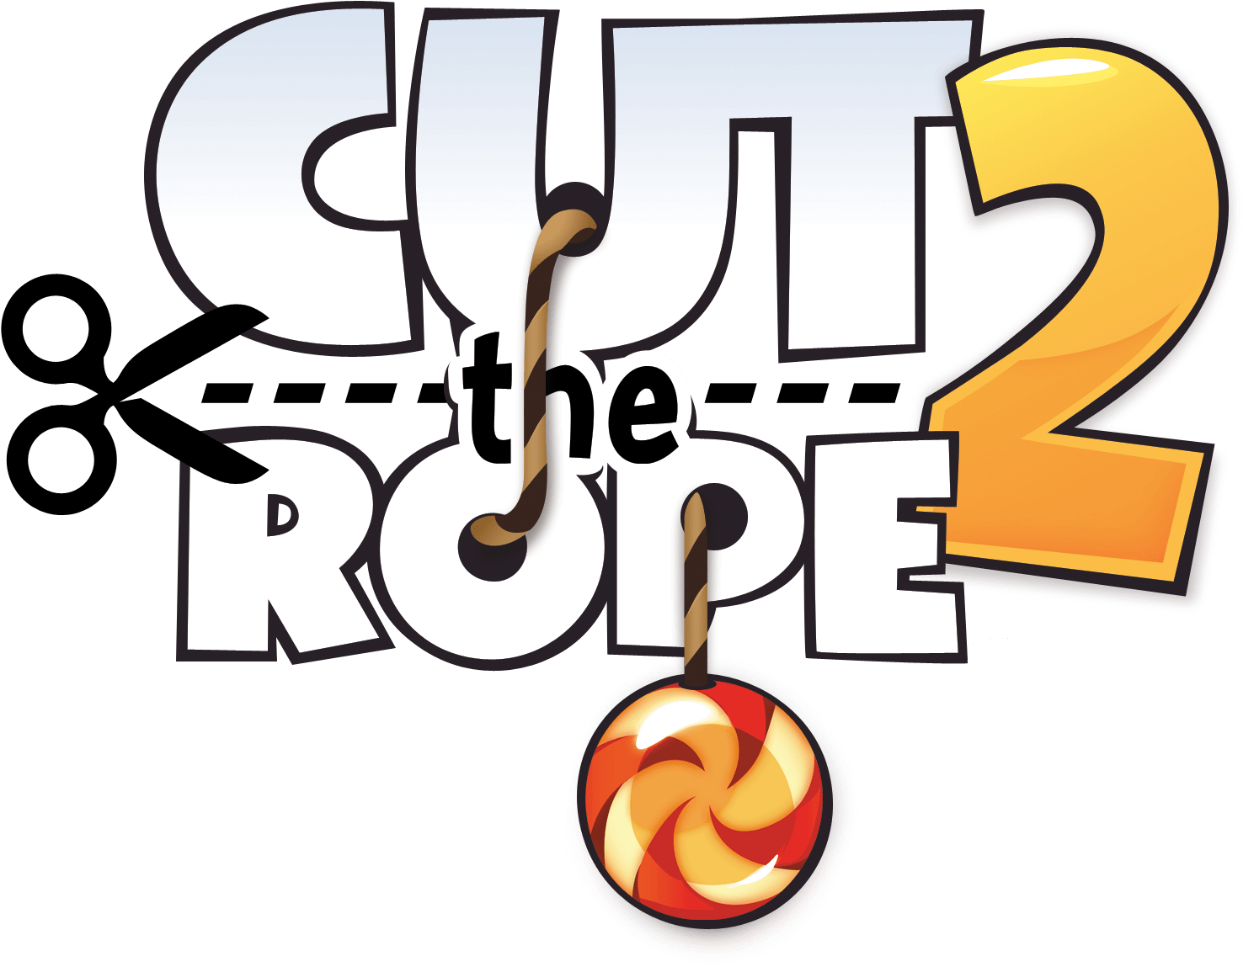 Cut The Rope 2 Character Vectors on Behance